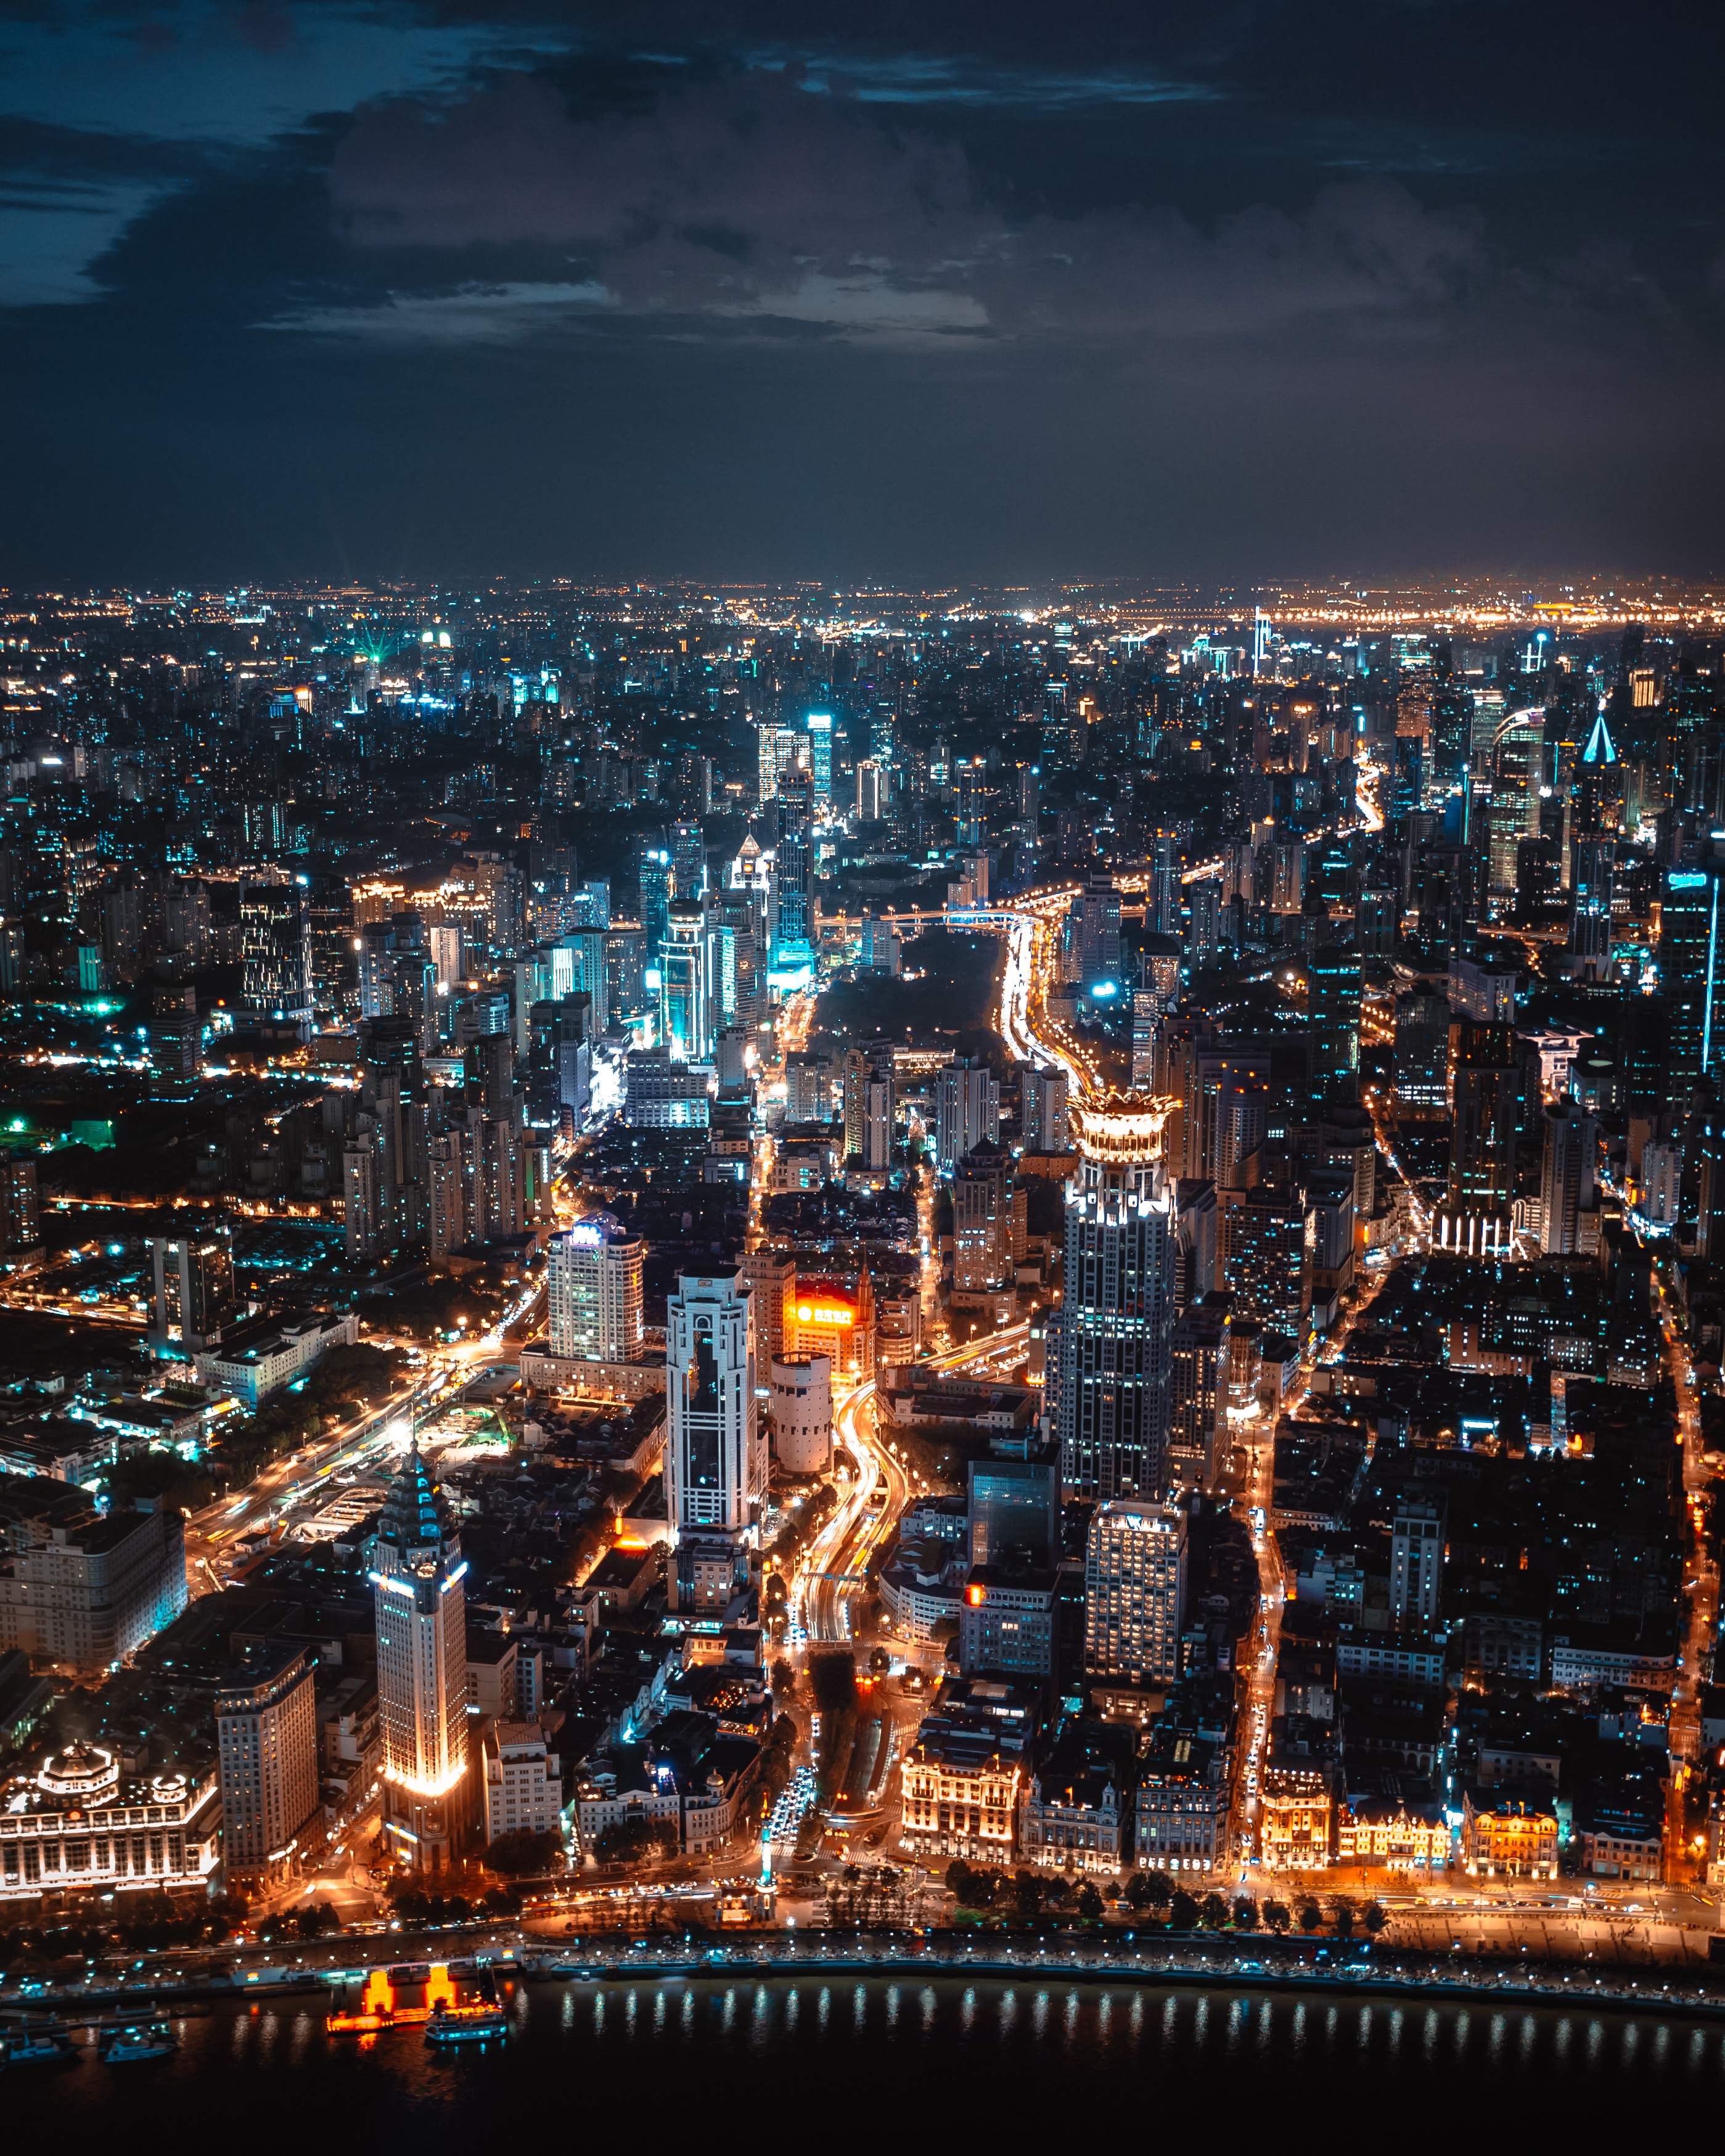 city lights, cities, view from above, night city, skyscrapers